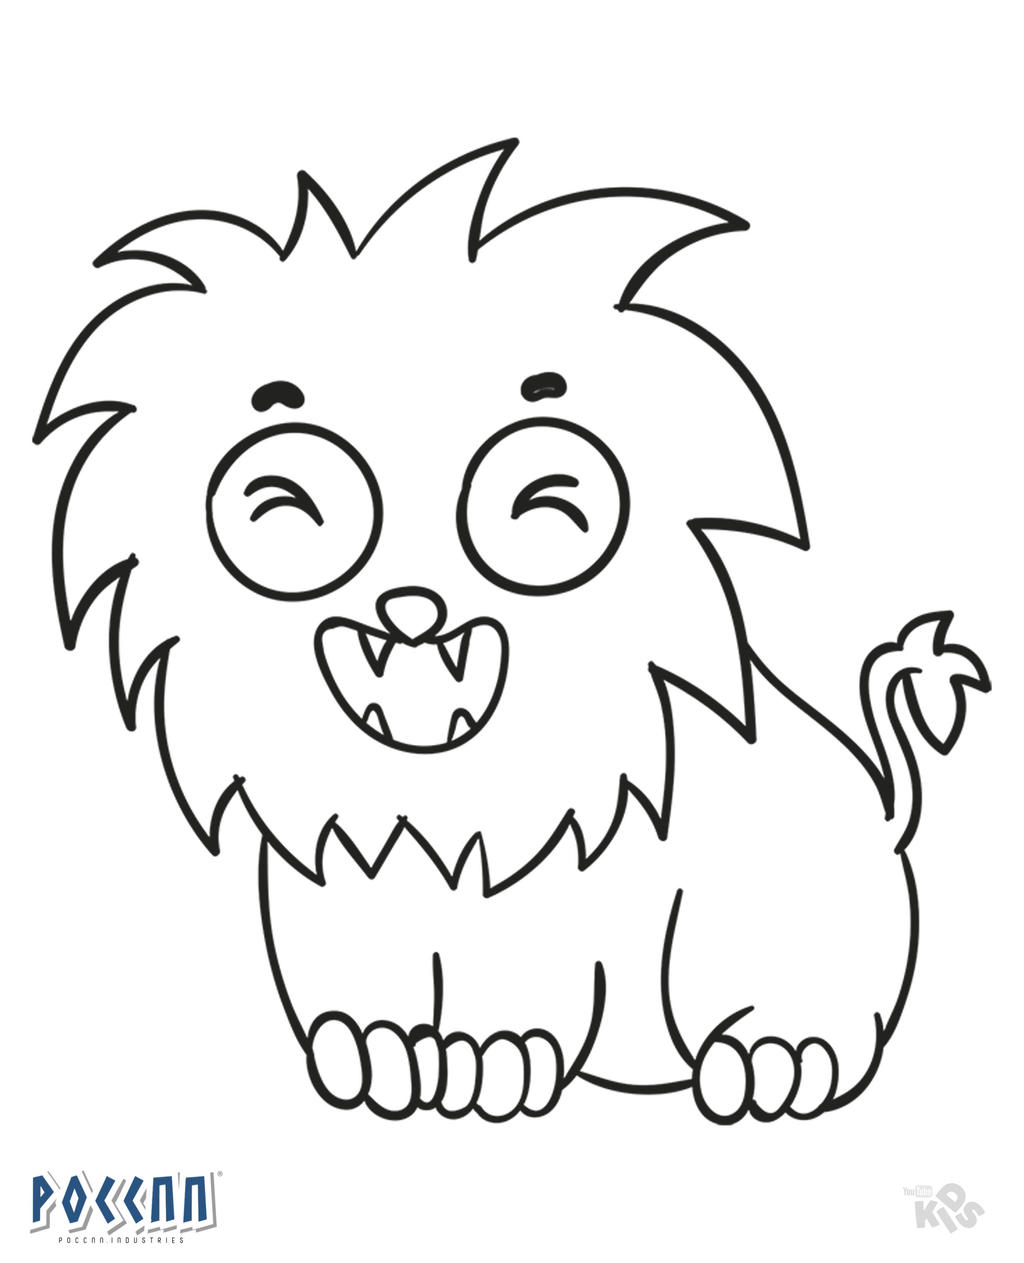 Lion Kawaii to color (Lineart) by PoccnnIndustries on DeviantArt